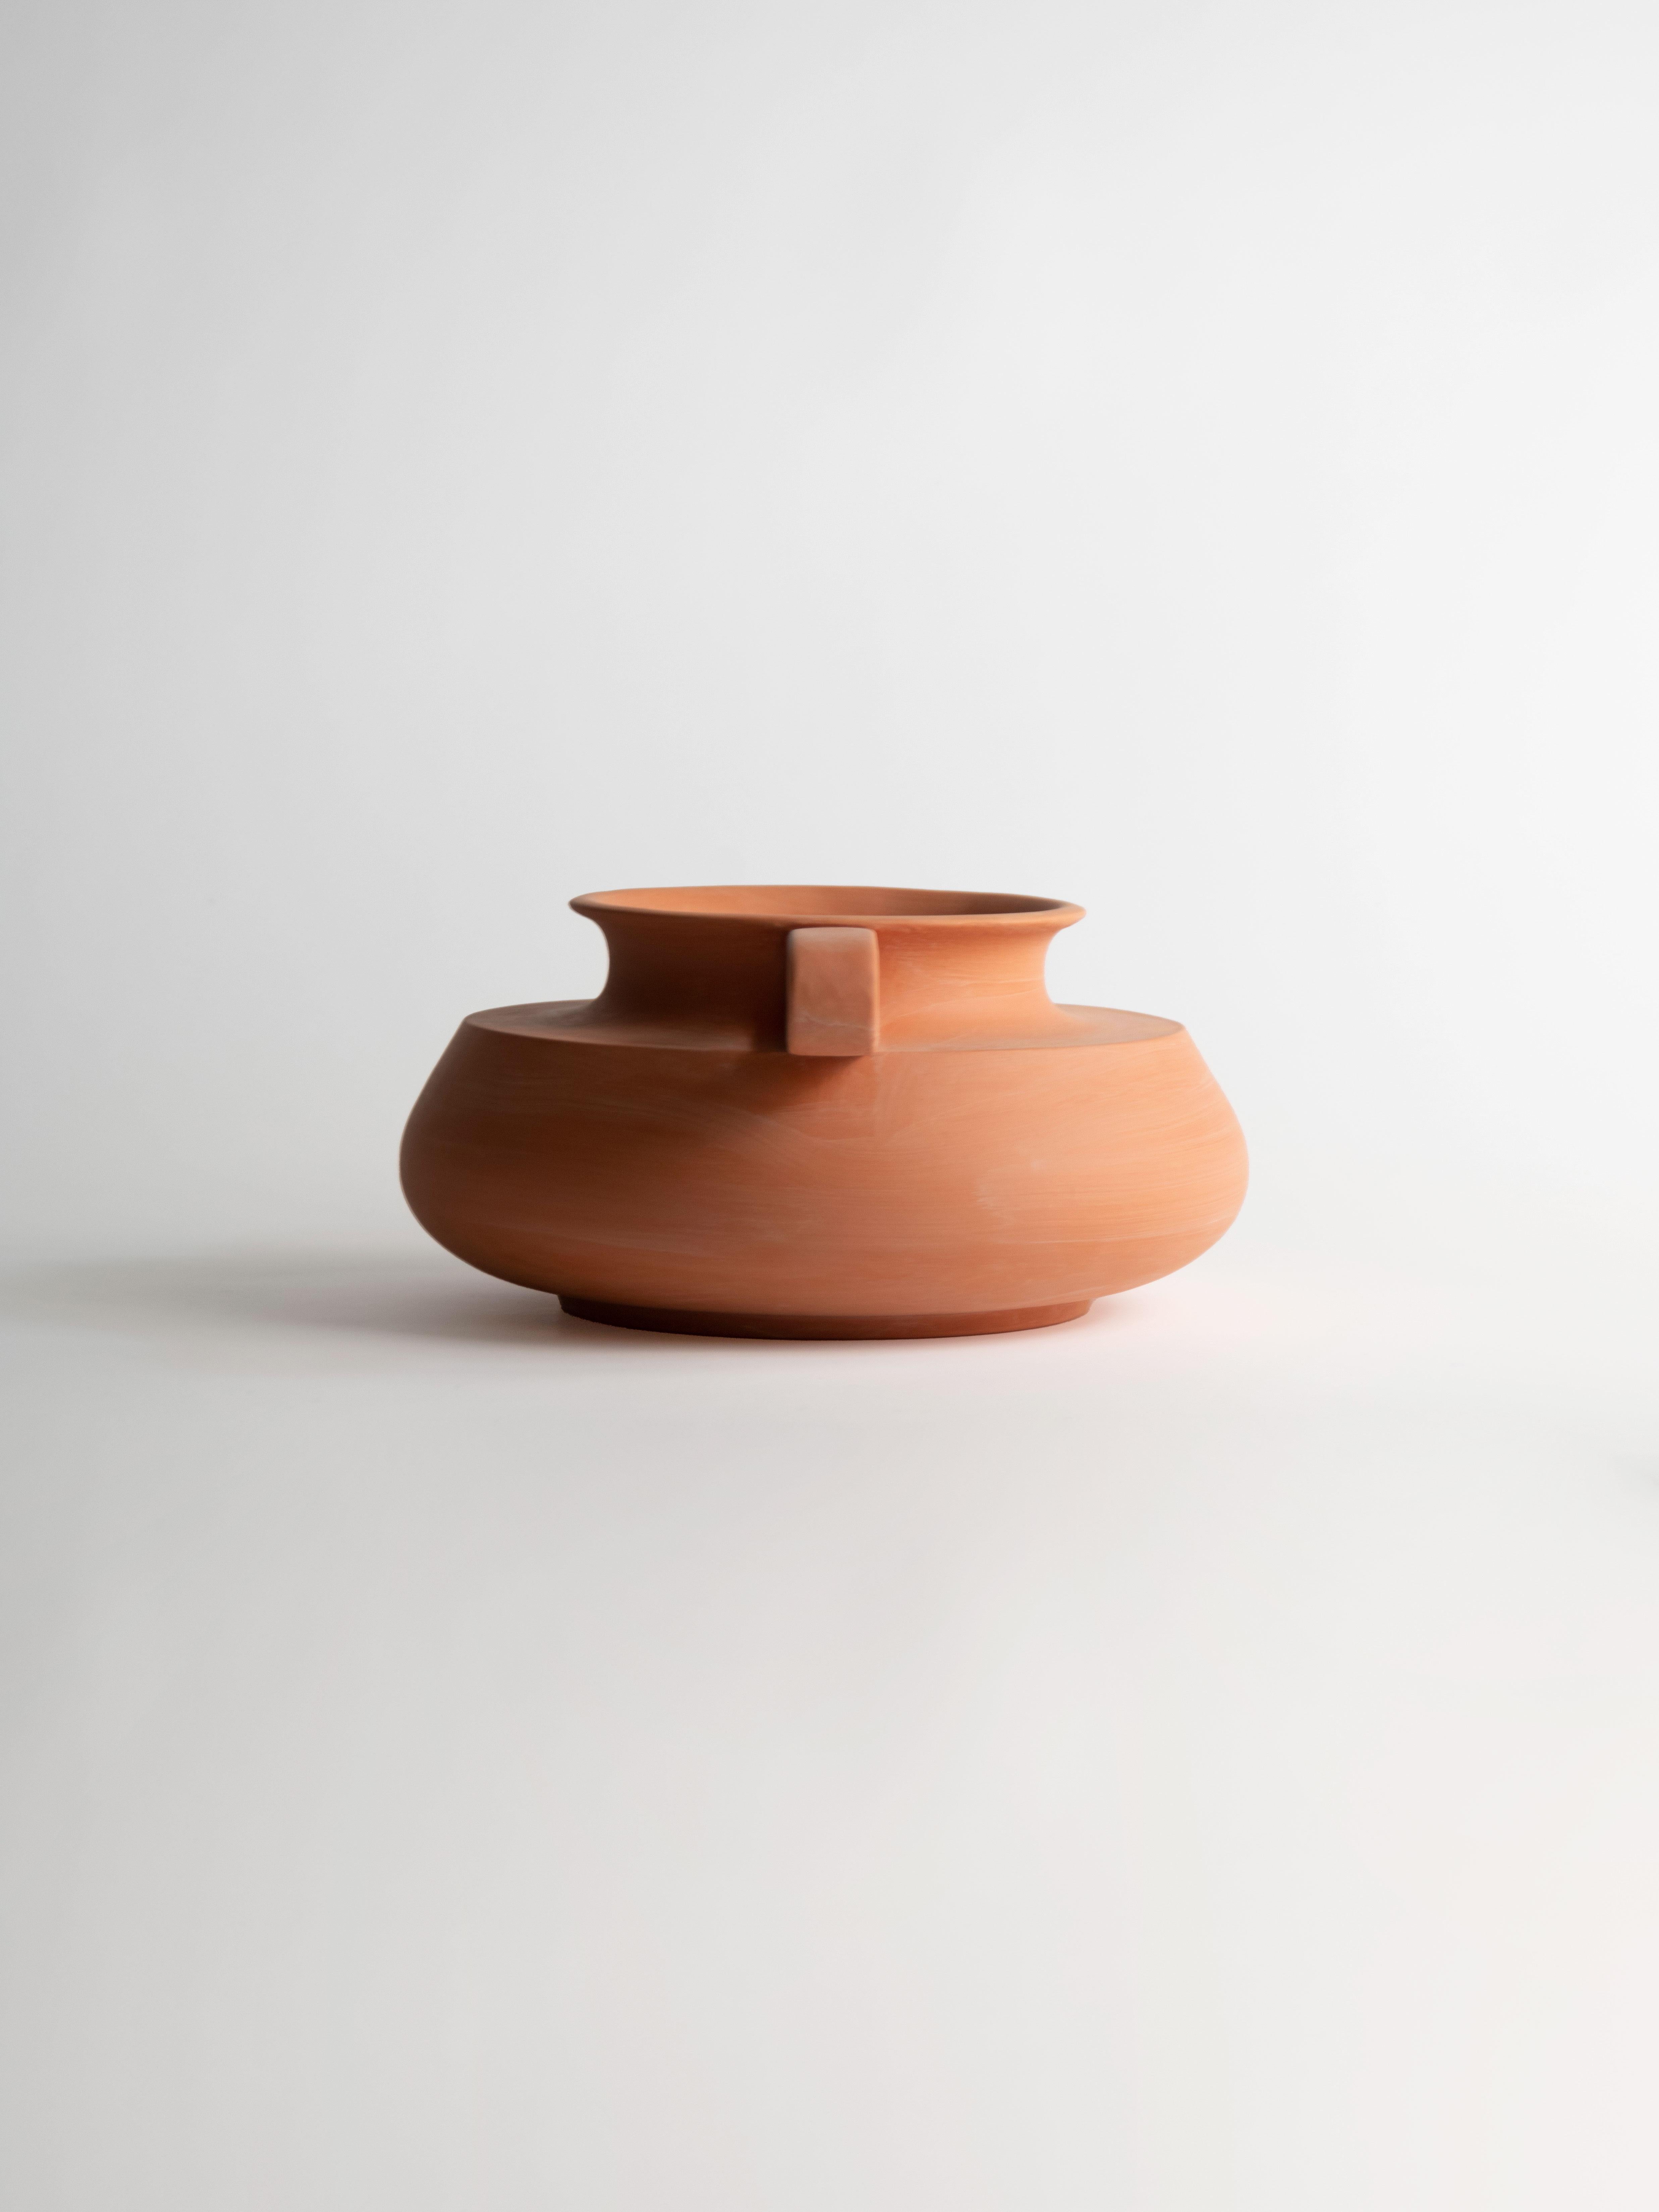 Cannate 3 Pot by Secondome Edizioni
Designer: Giulio Iacchetti.
Dimensions: Ø 37 x H 27 cm.
Materials: Clay. 

Collection / Production: Secondome. Available in different shapes. Please contact us.

THE GALLERY
Secondome is a Design Gallery focused